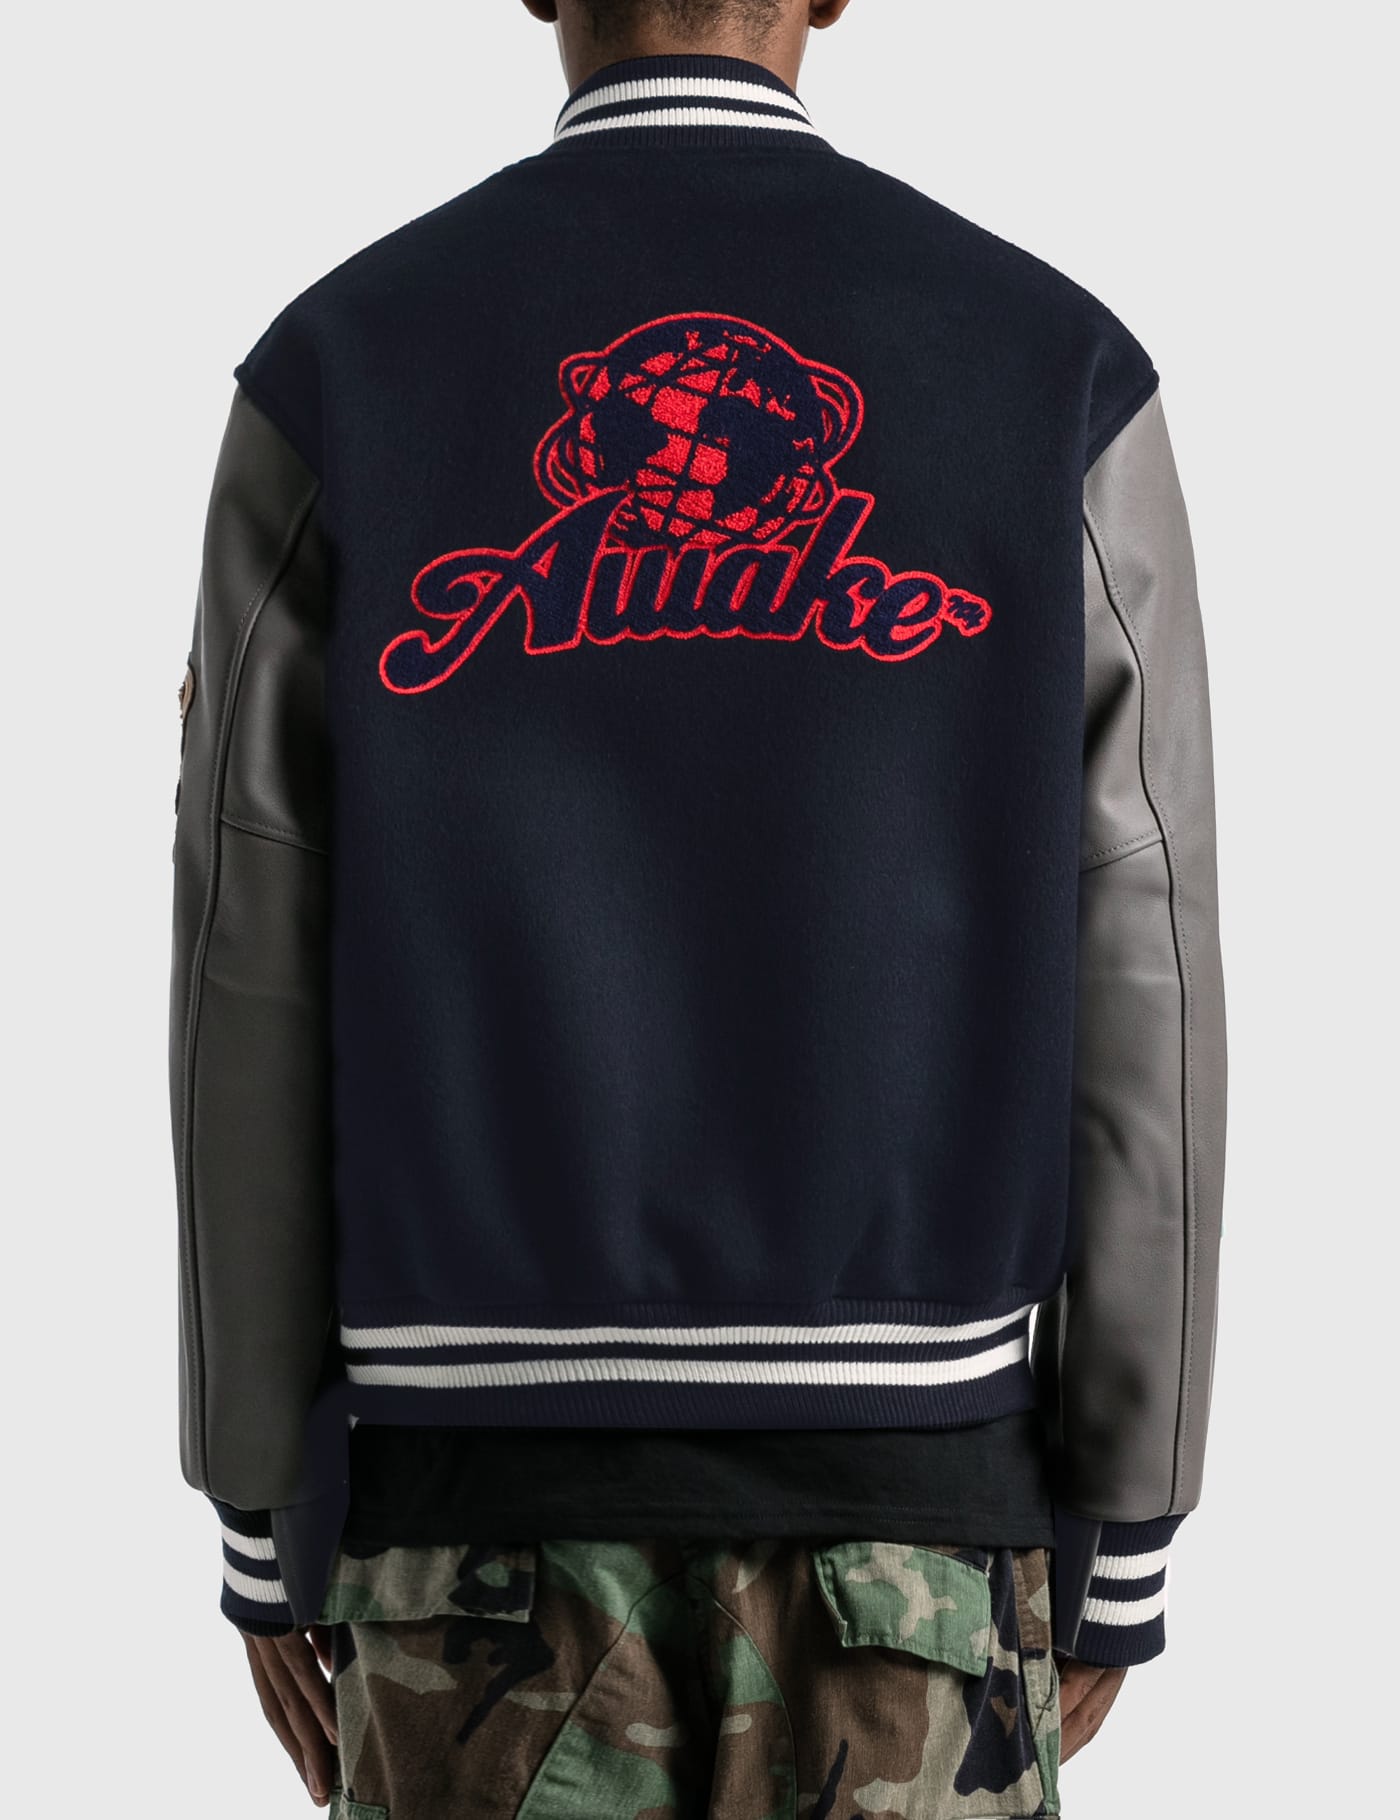 Awake NY - Chenille Patches Varsity Jacket | HBX - Globally Curated Fashion  and Lifestyle by Hypebeast